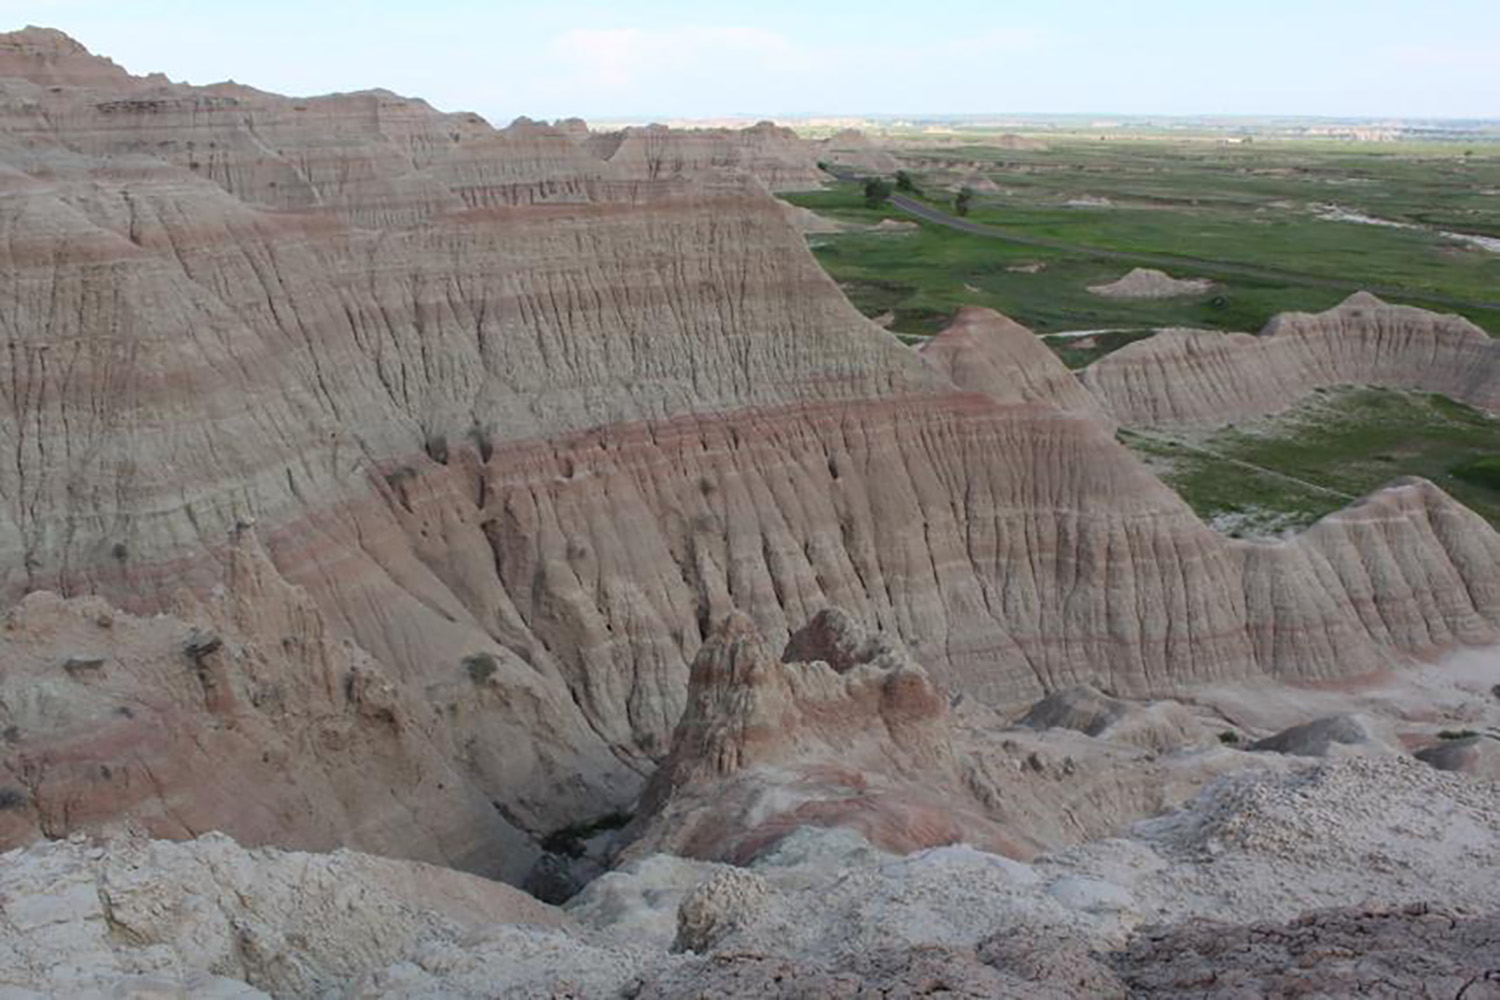 A close-up of Saddle Pass trail at the Badlands National Park.